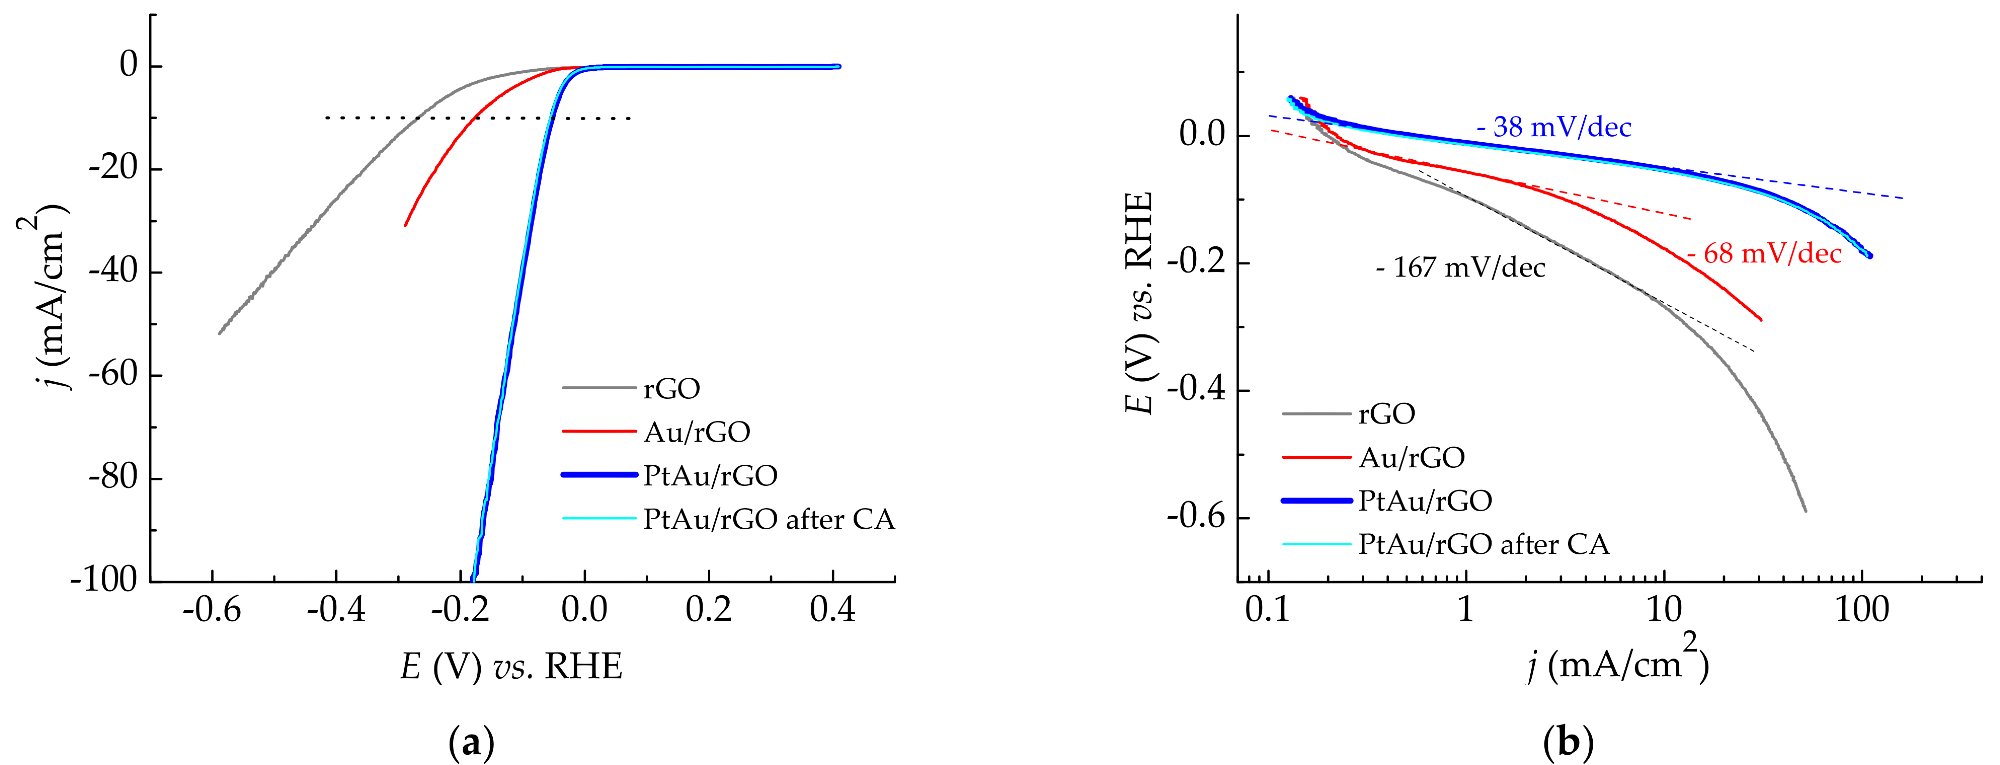 Hydrogen evolution reaction in 0.5 M H2SO4: (a) LSV curves recorded at a scan rate of 10 mV/s for rGO, Au/rGO, and PtAu/rGO electrodes, as well as for PtAu/rGO alone after stability test; (b) Derived Tafel slopes.